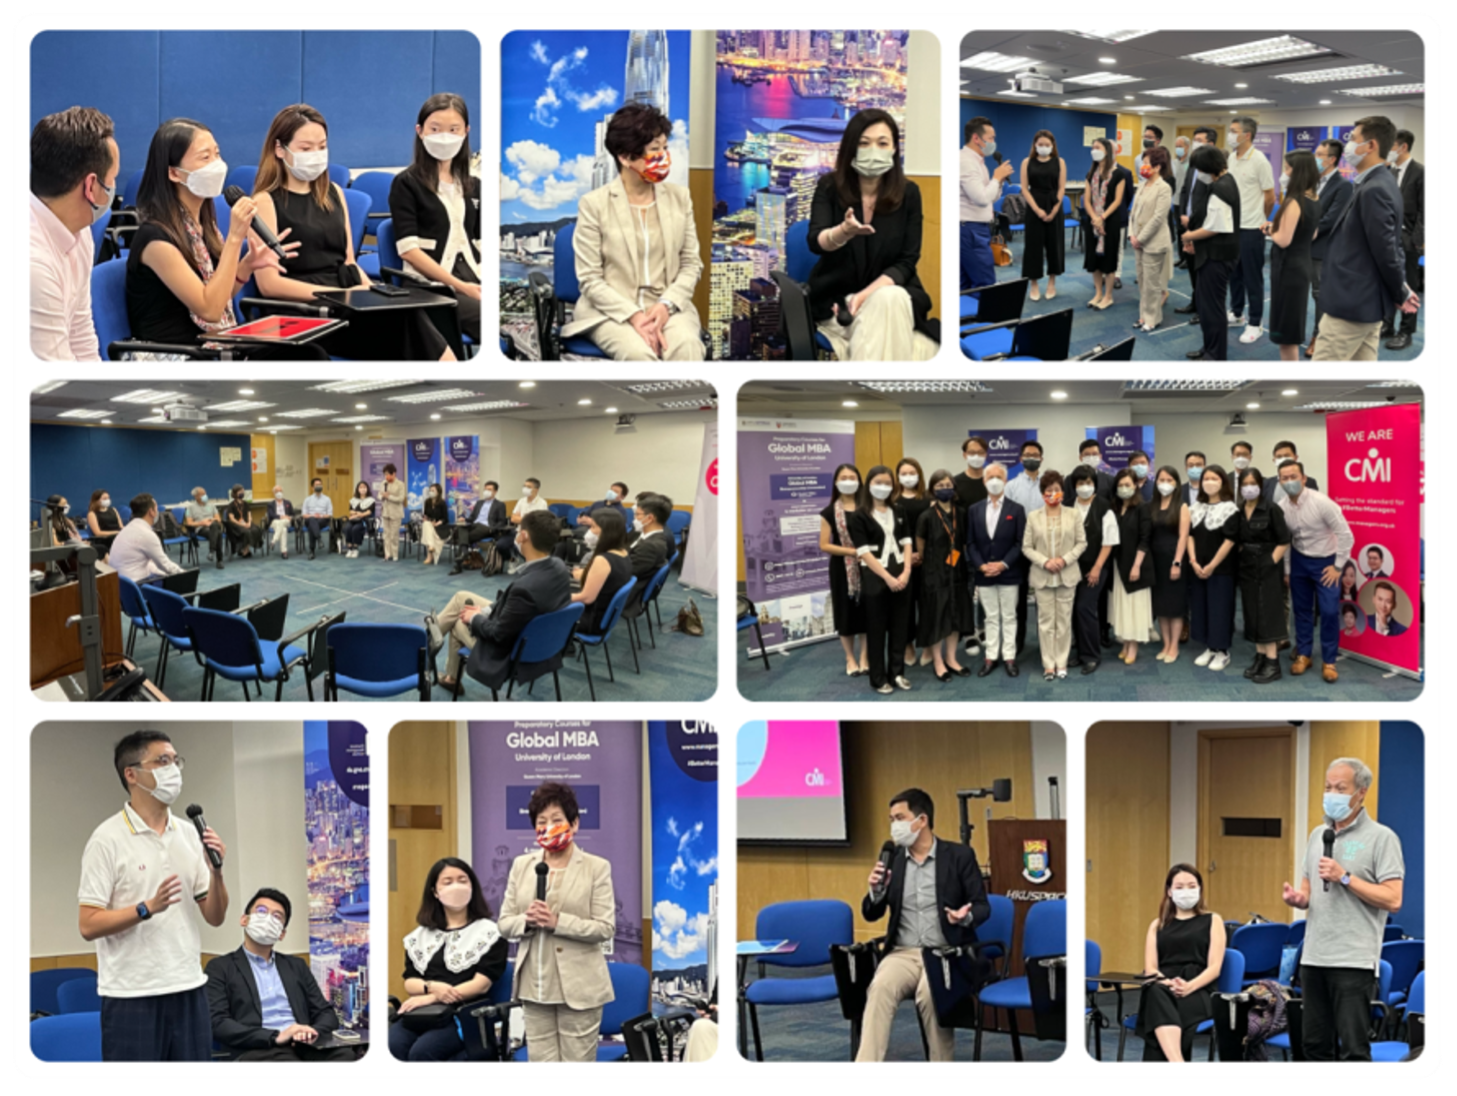 Montage of photographs from HKU SPACE x CMI Student & Alumni Event